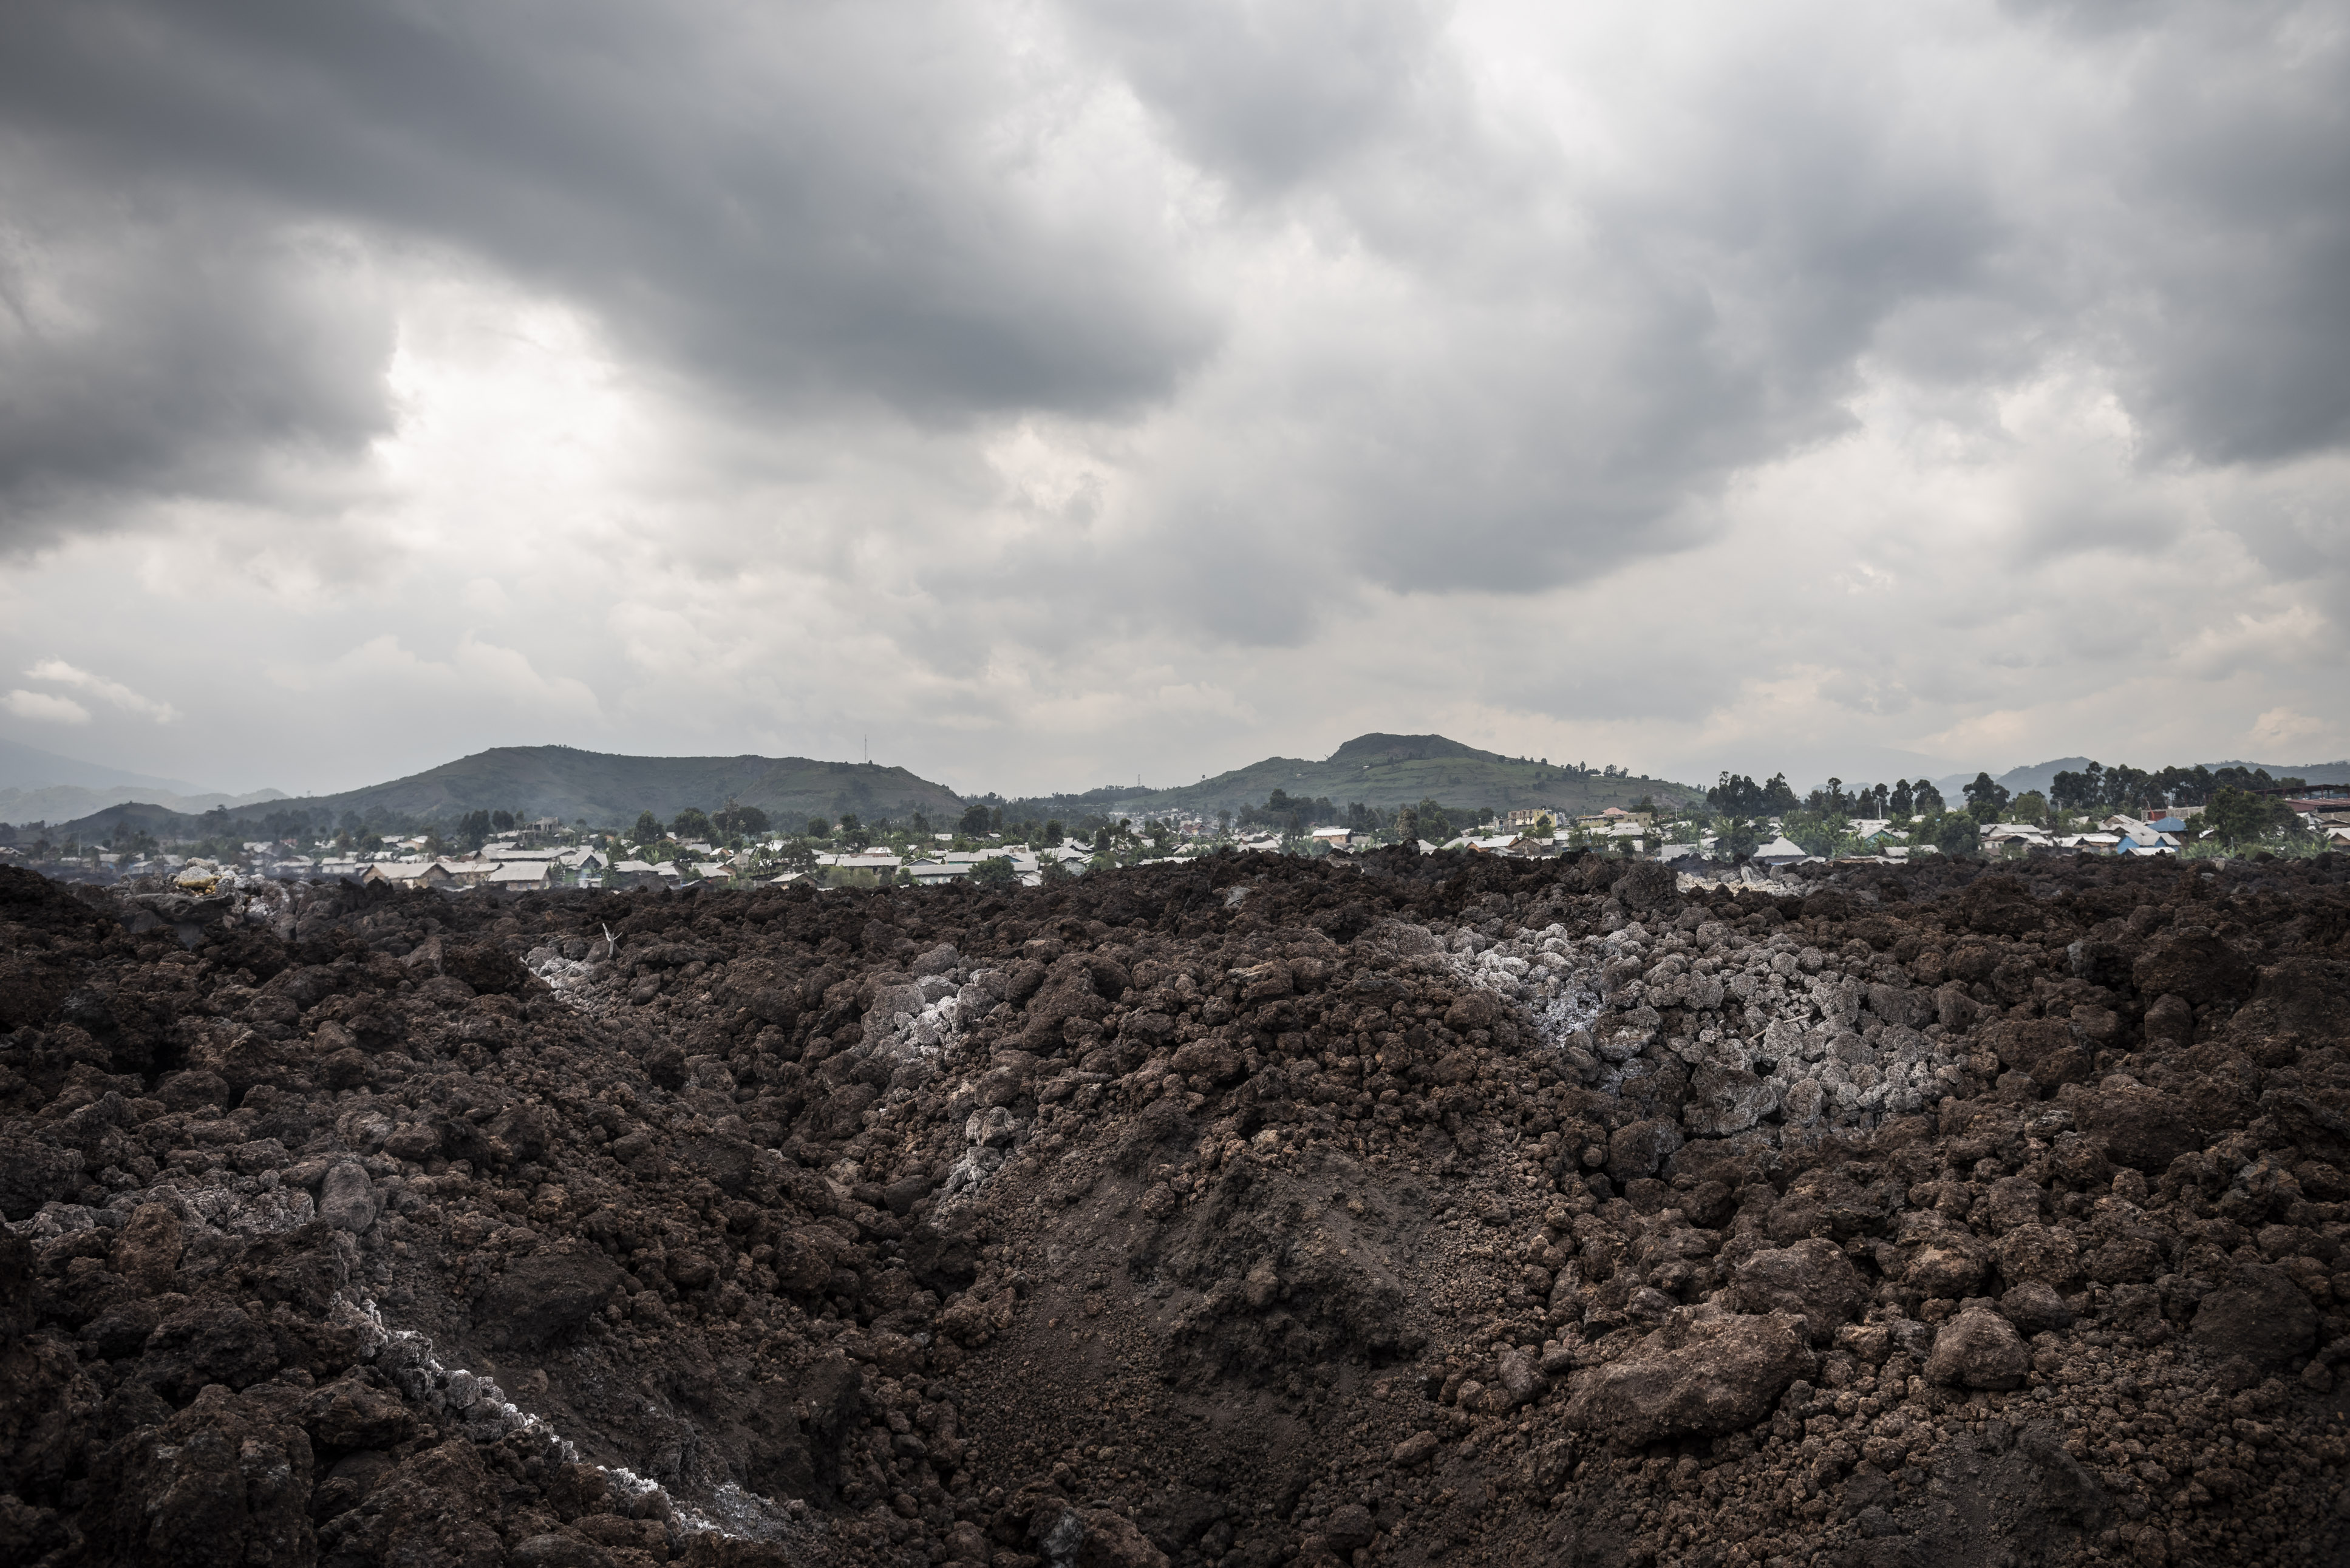 Care of children affected by the eruption of the Nyiragongo volcano in Goma, DRC-4